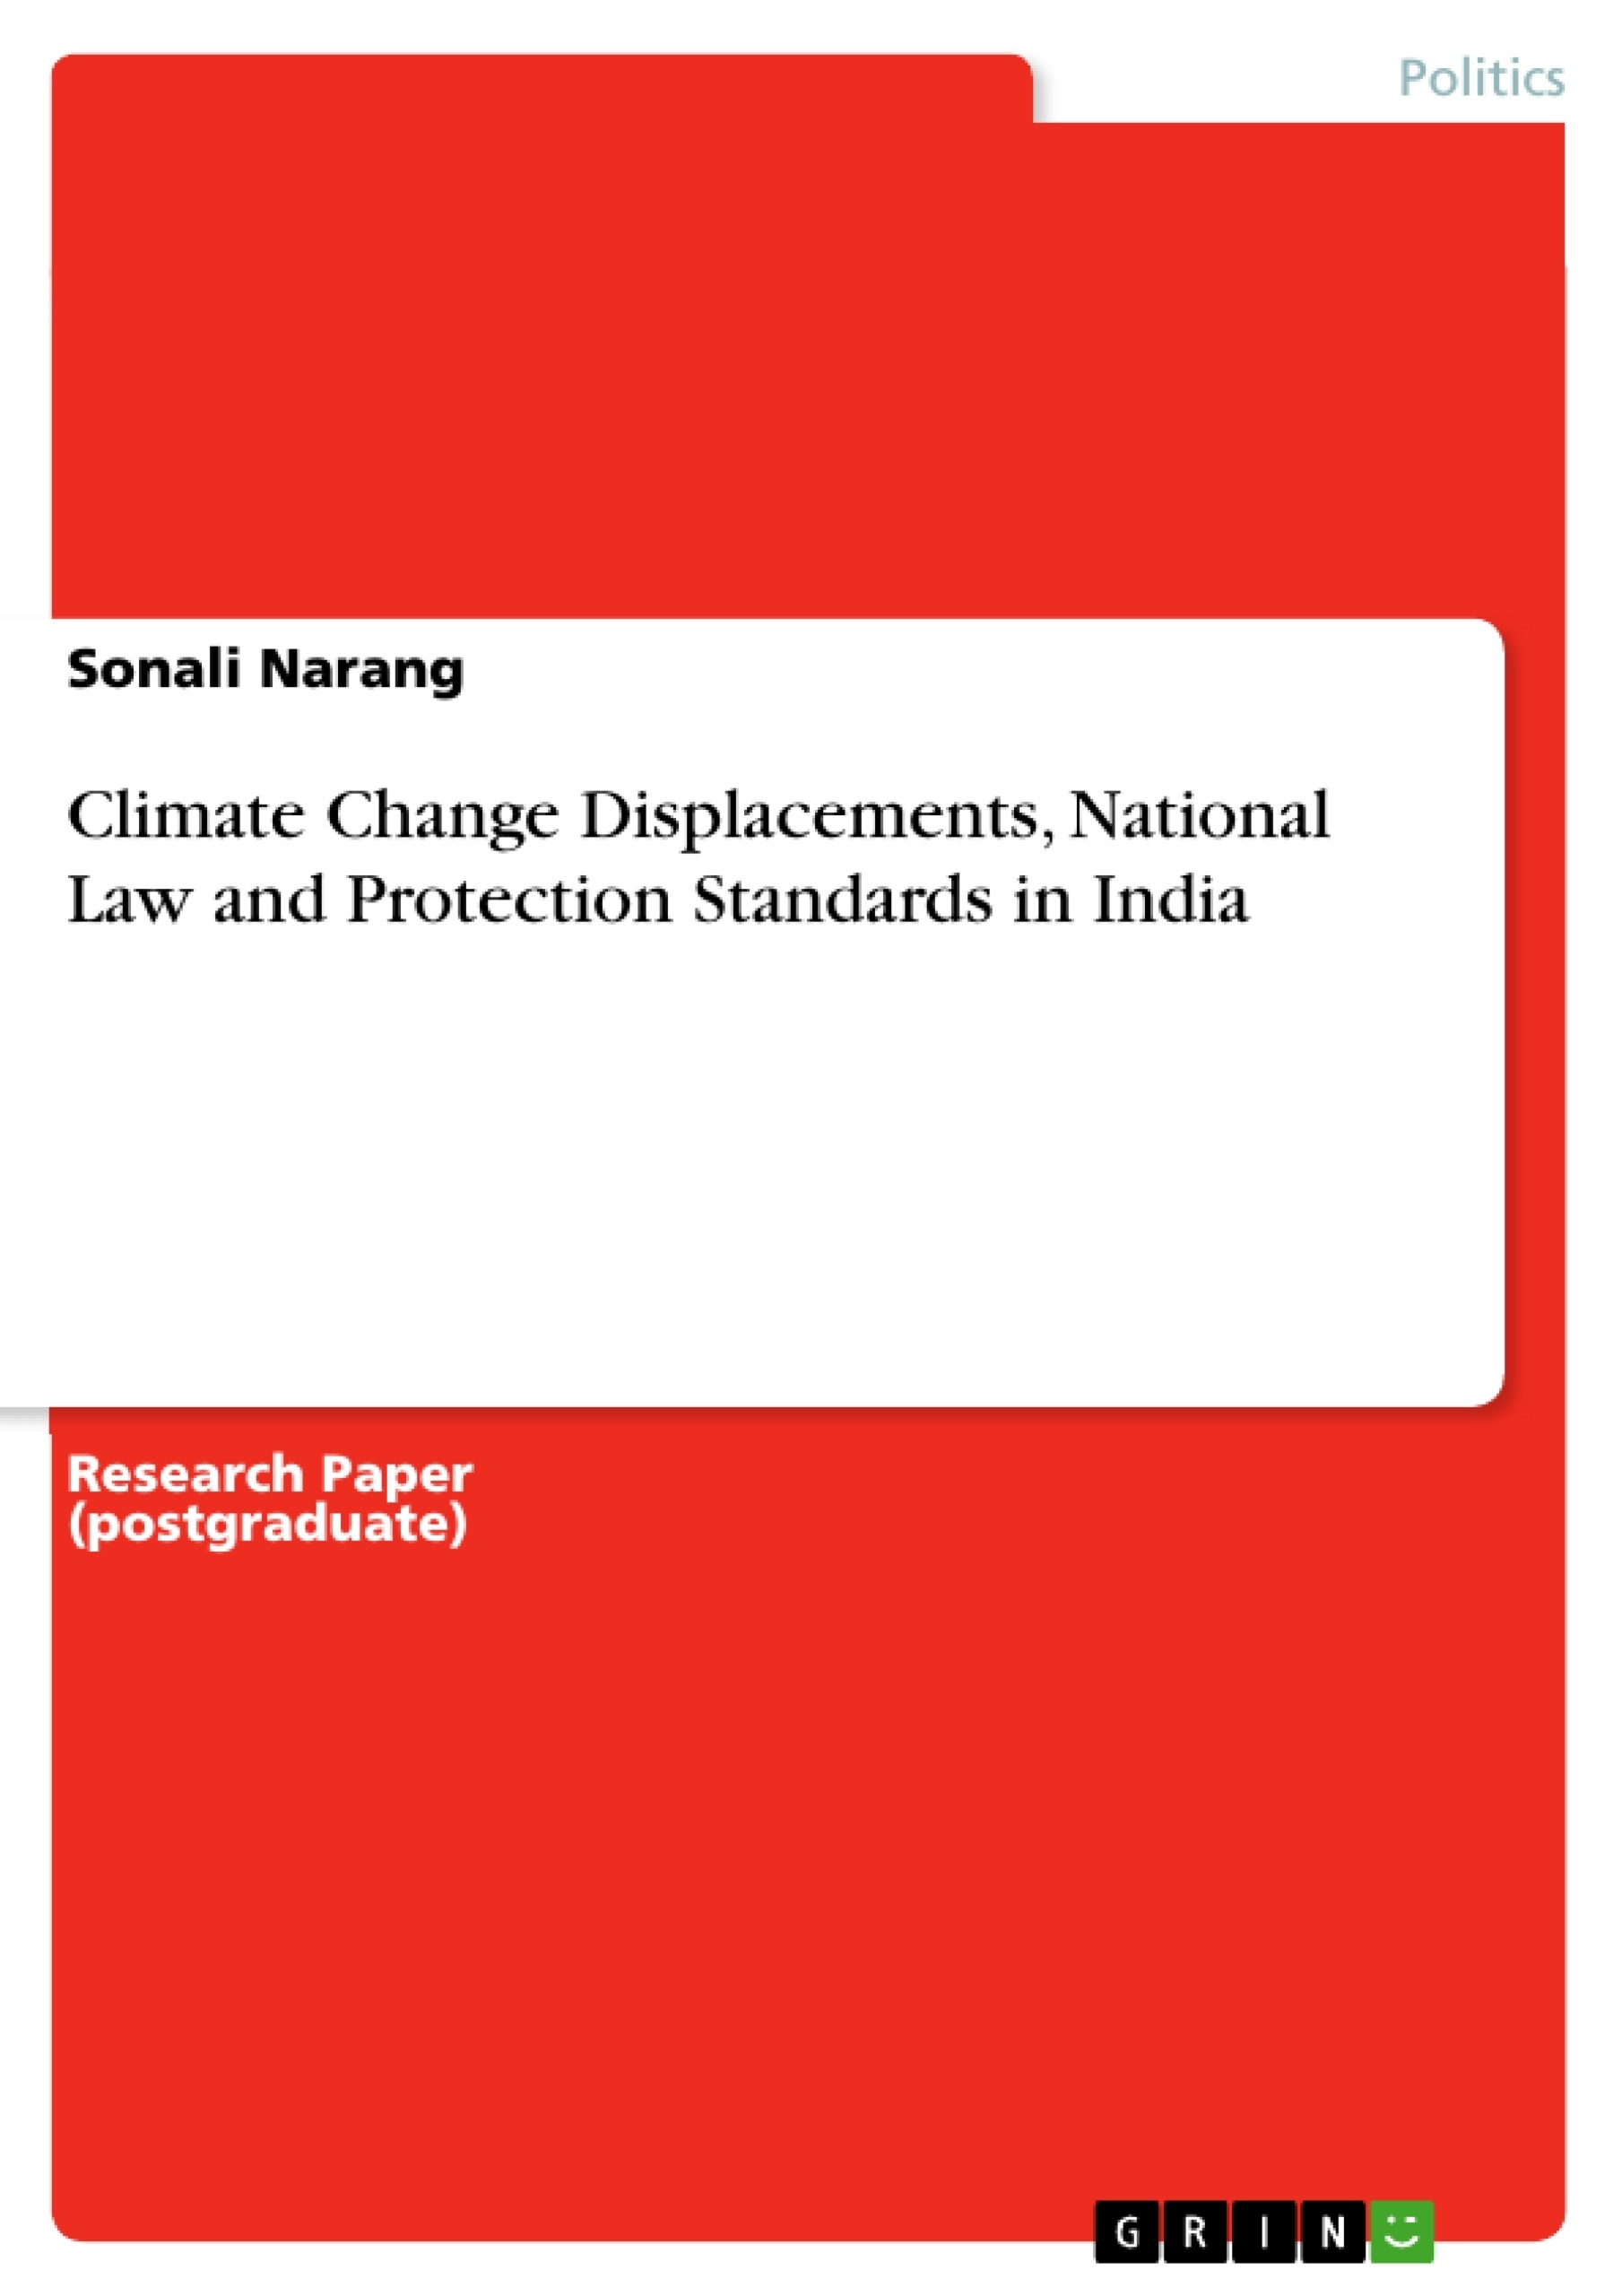 Titre: Climate Change Displacements, National Law and Protection Standards in India